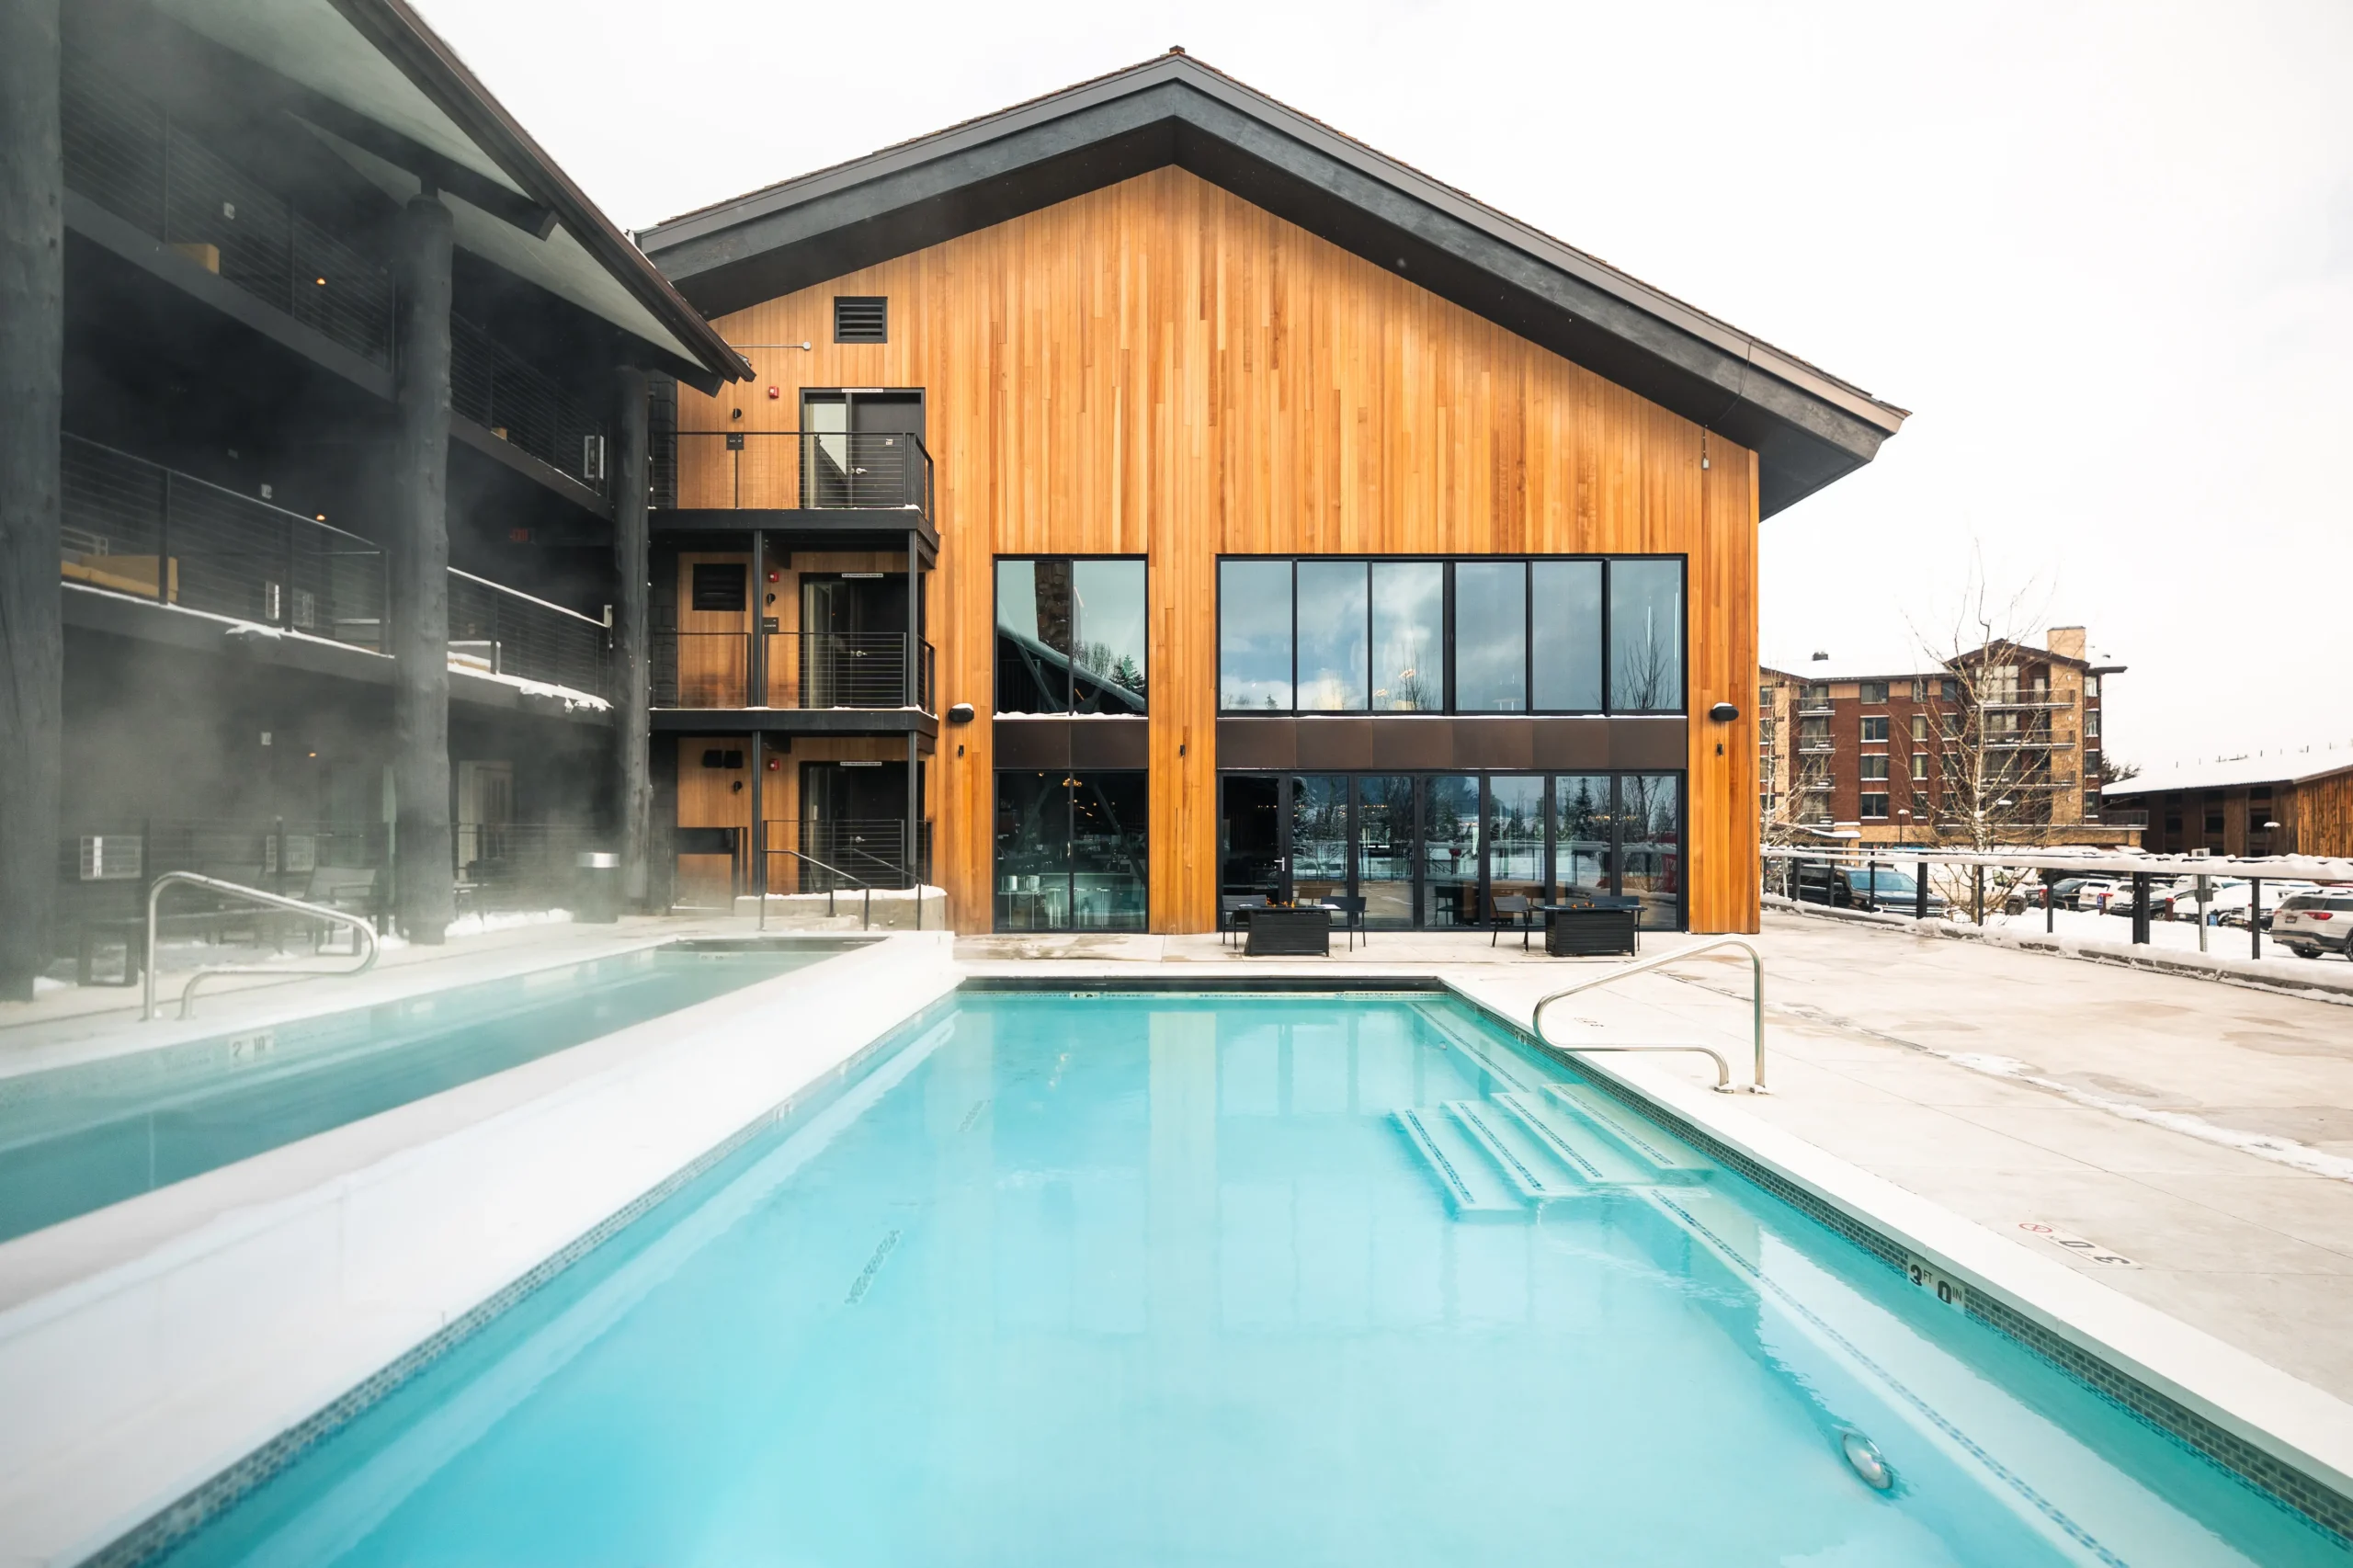 Gravity Haus Jackson Hole Heated Pool and Hot Tub for Recovery